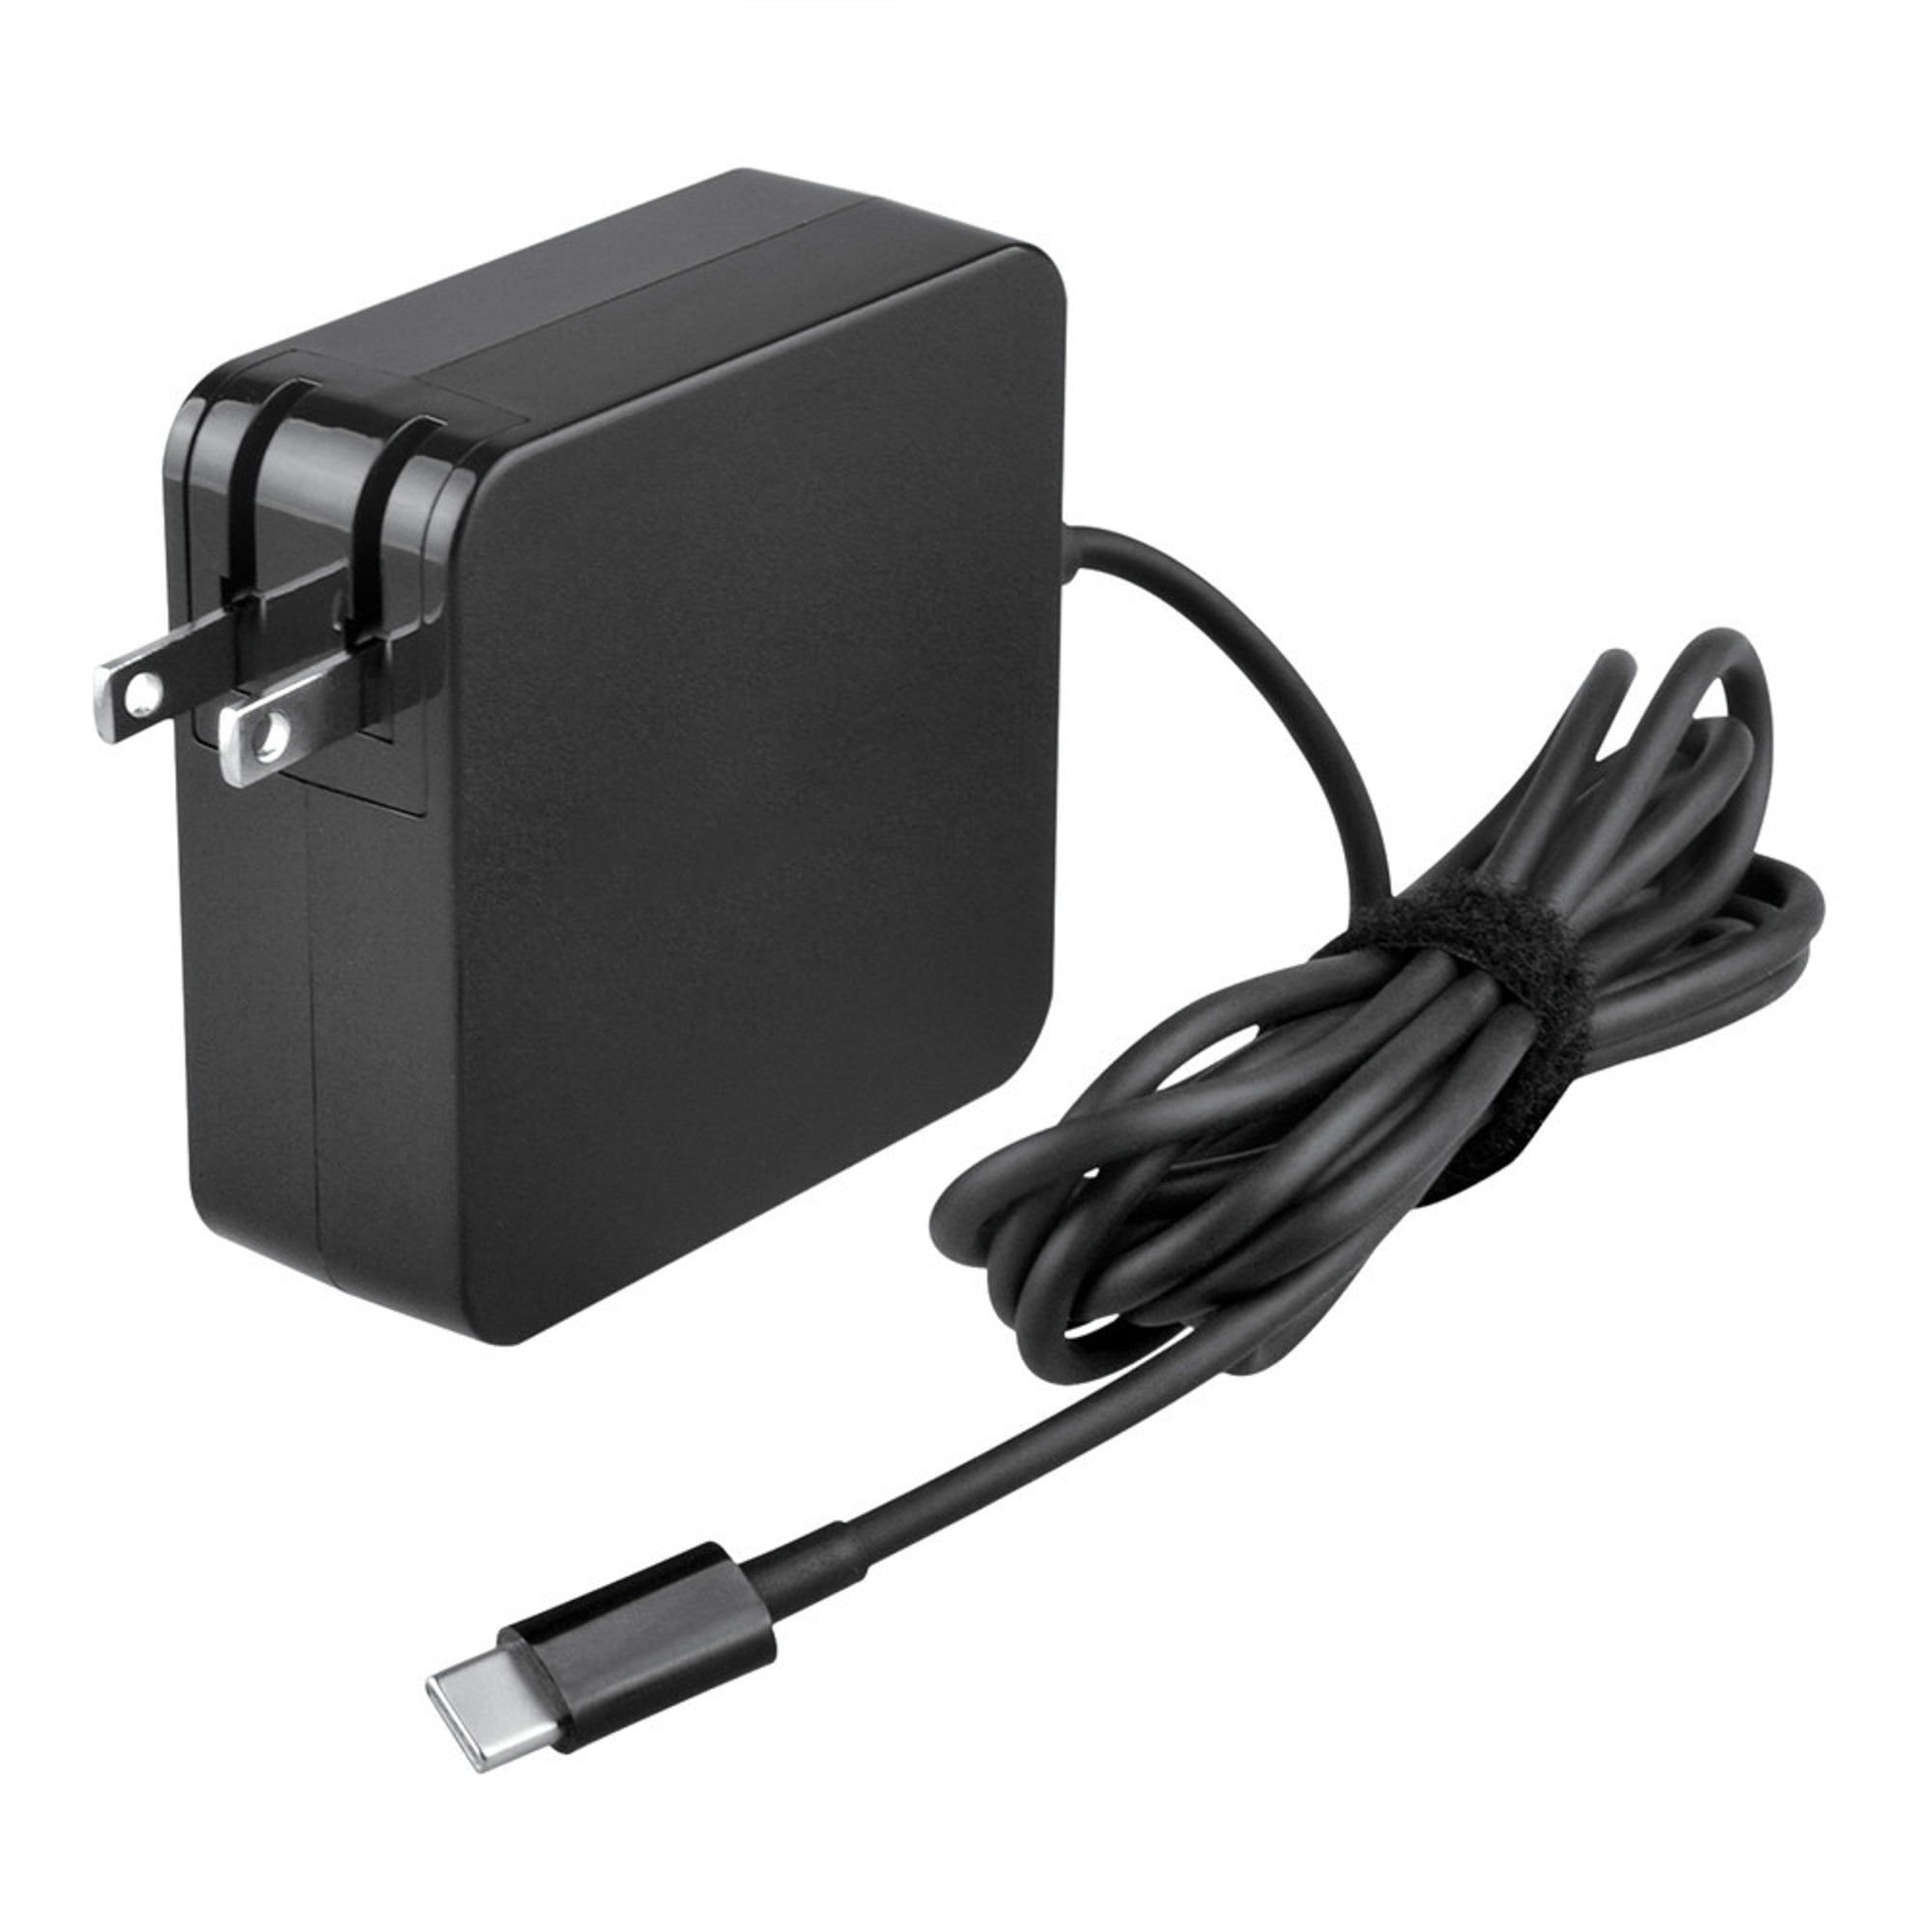 K-MAINS USB-C 65W USB-C Charger AC Replacement for Sonos Move Smart Portable WiFi & Bluetooth - Walmart.com